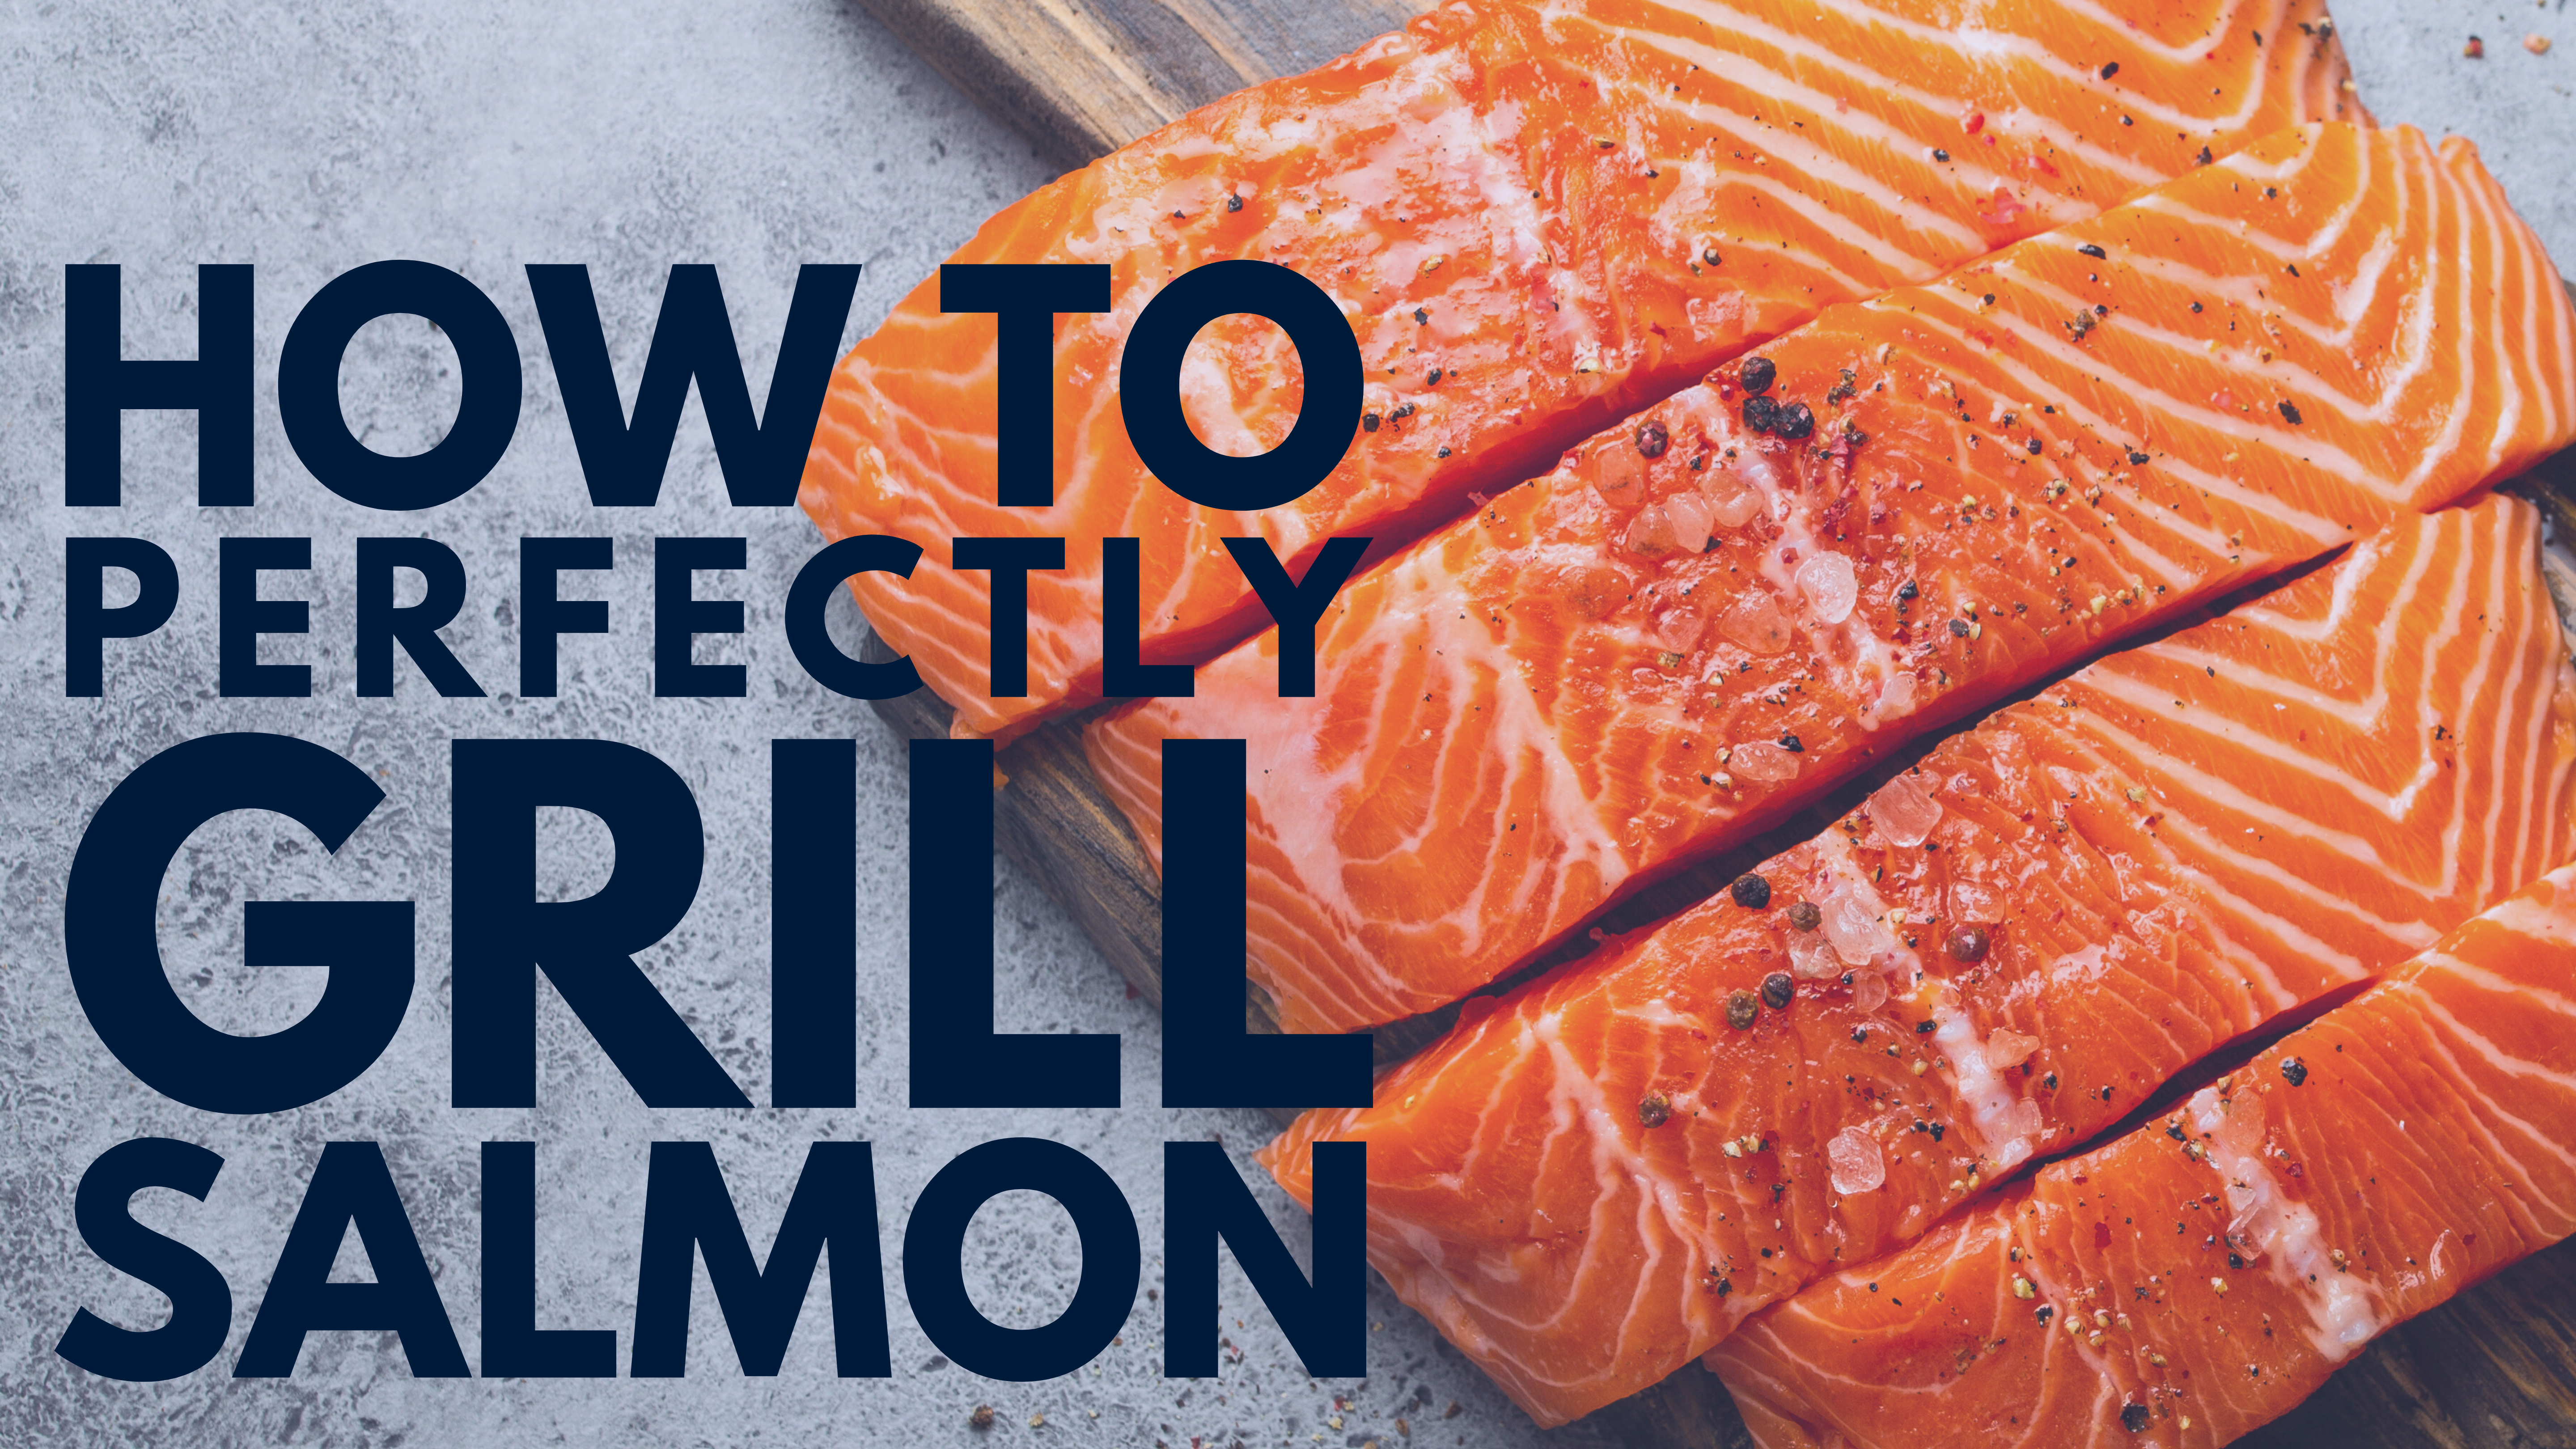 How to Grill Salmon in 9 Simple Steps